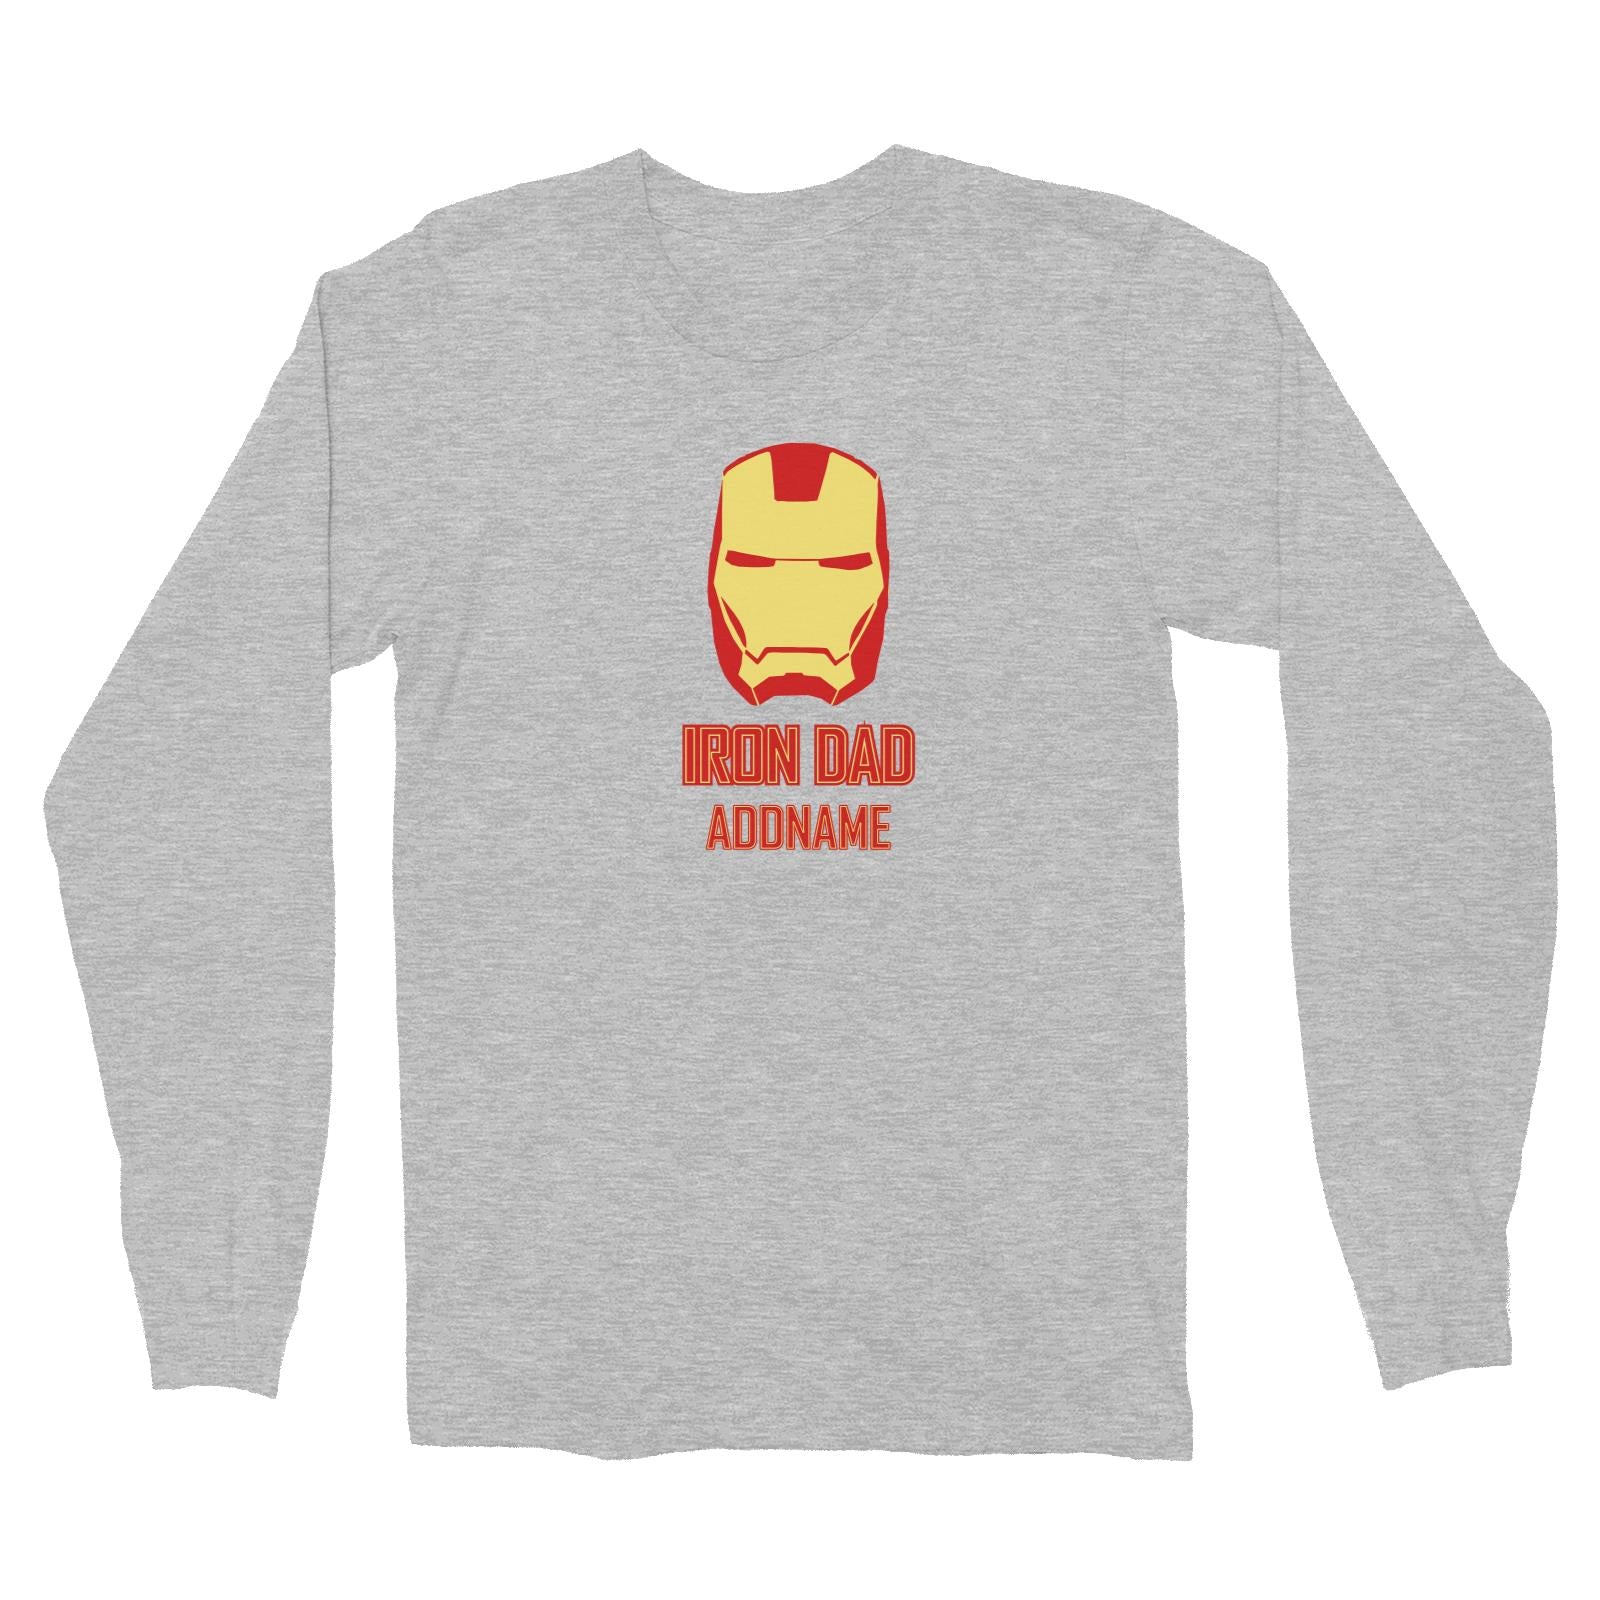 Superhero Iron Dad Addname Long Sleeve Unisex T-Shirt  Matching Family Personalizable Designs